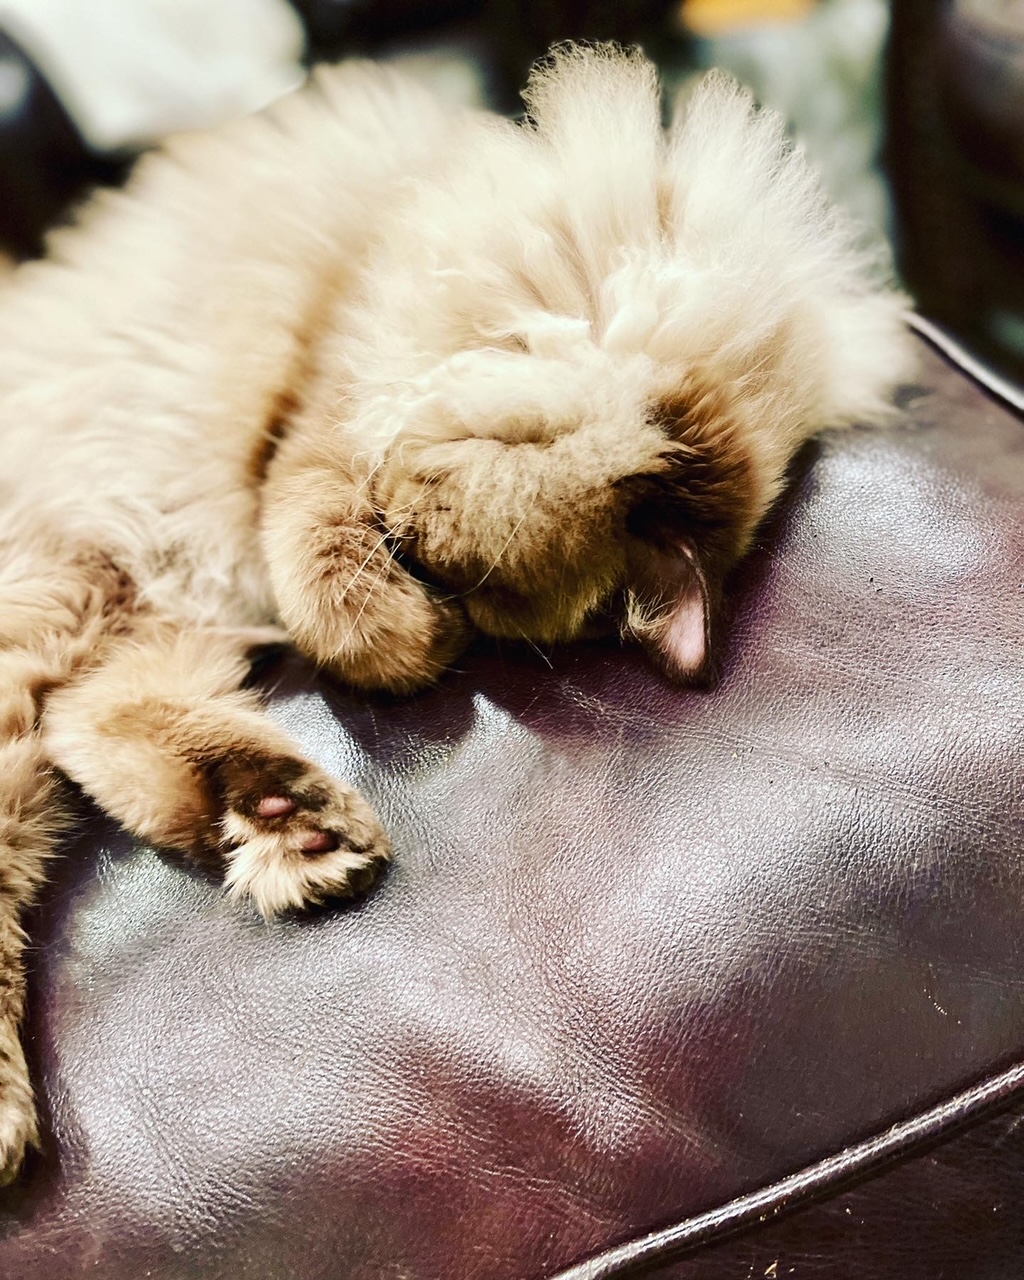 portrait photo of brown and white ragdoll cat curled up on brown leather ottoman